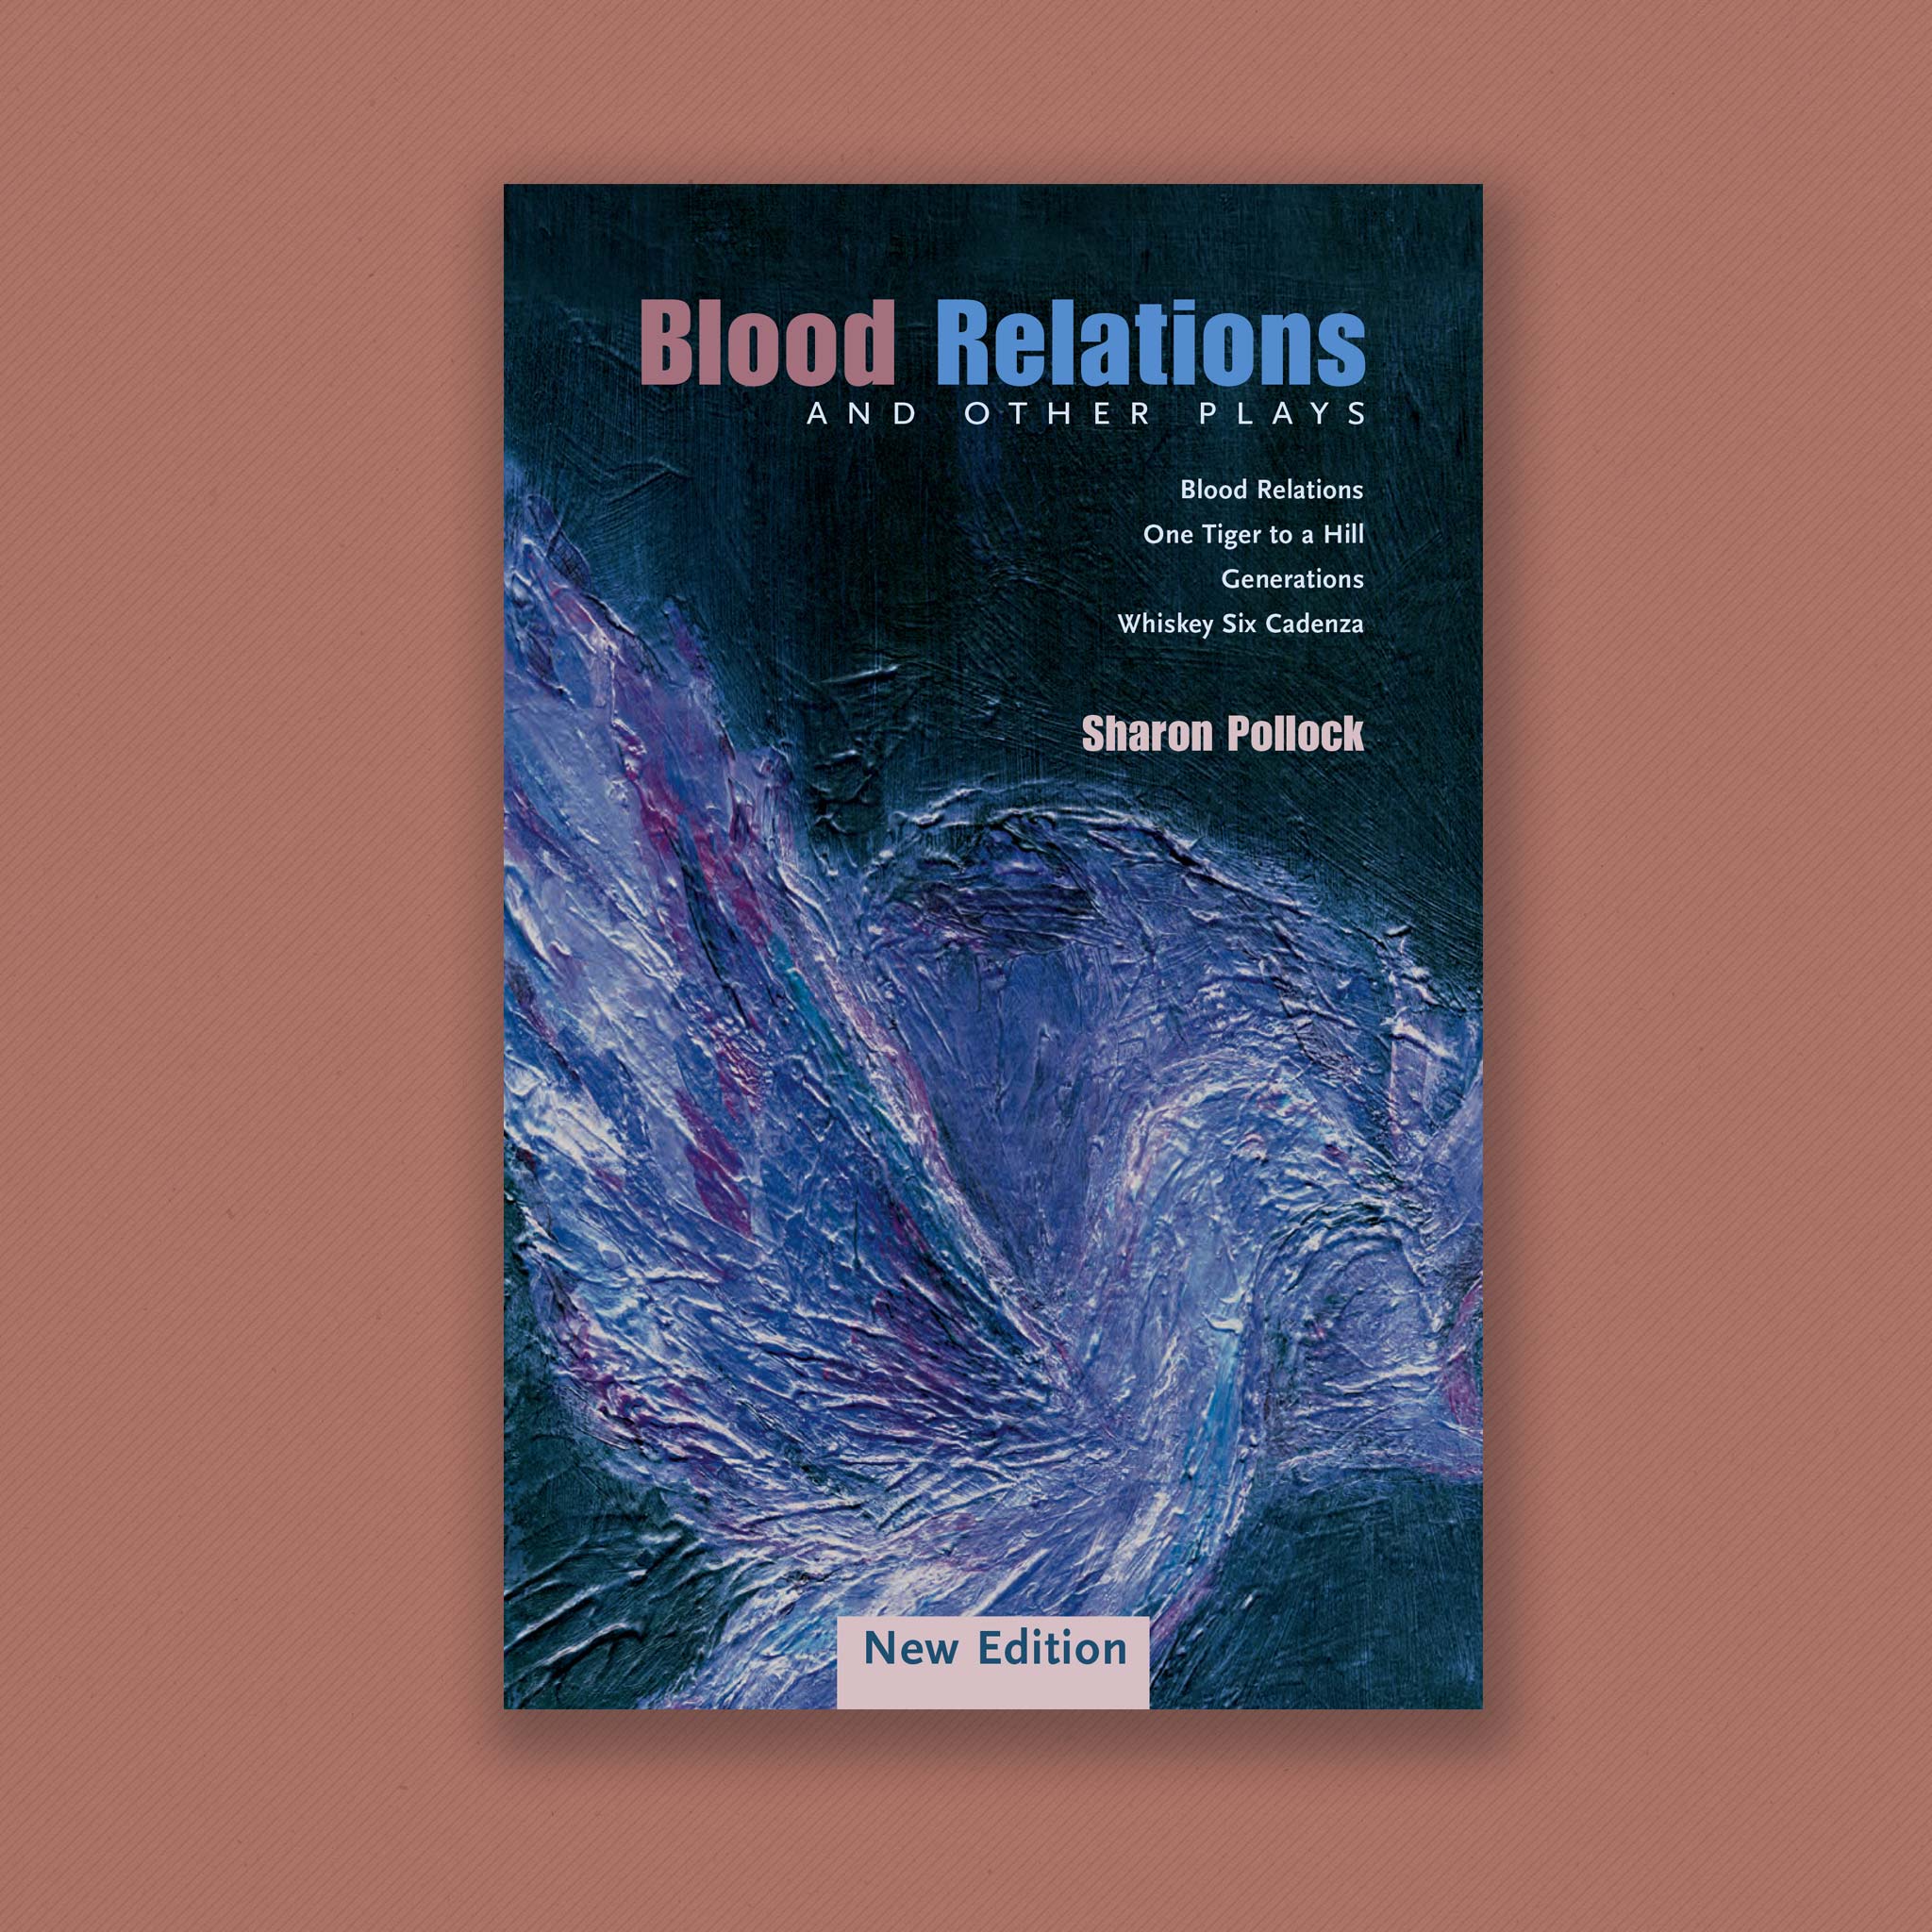 Blood Relations And Other Plays